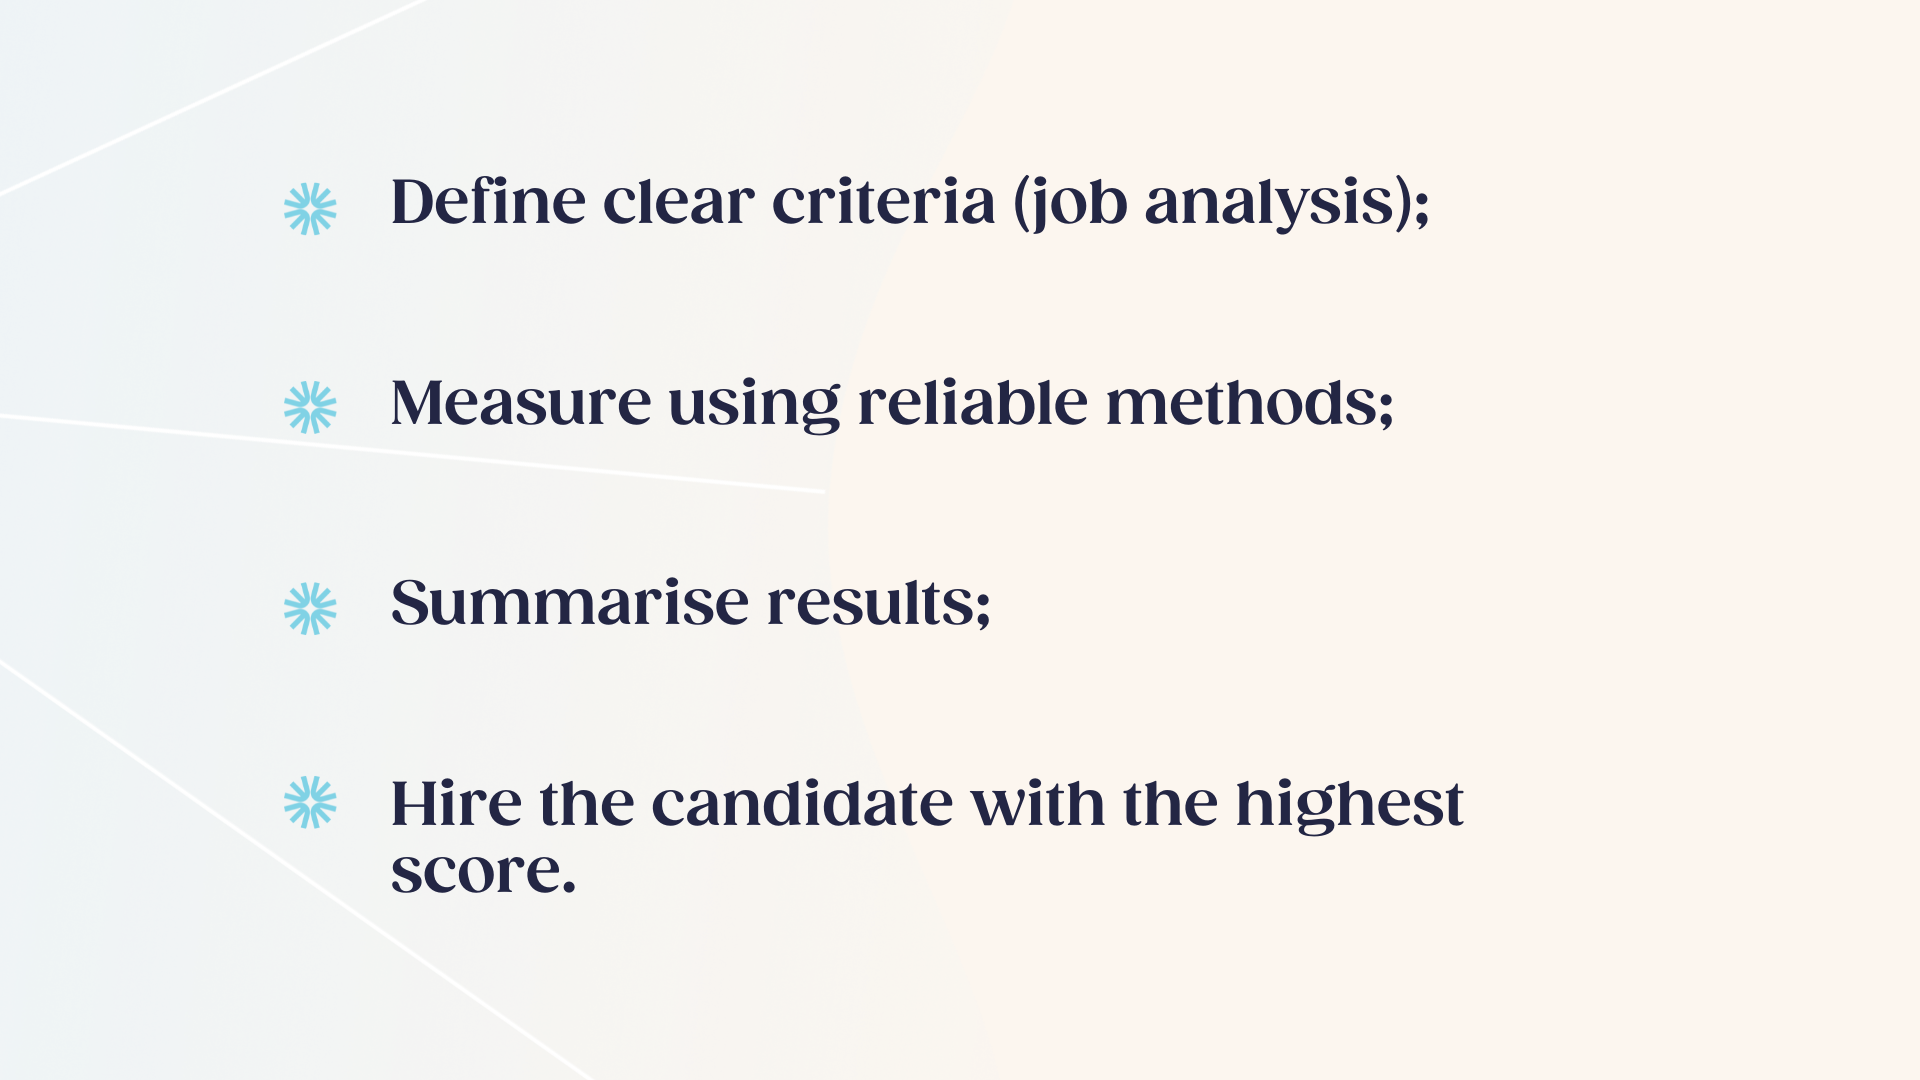 research - step by step guide for hiring executives - Wisnio.png